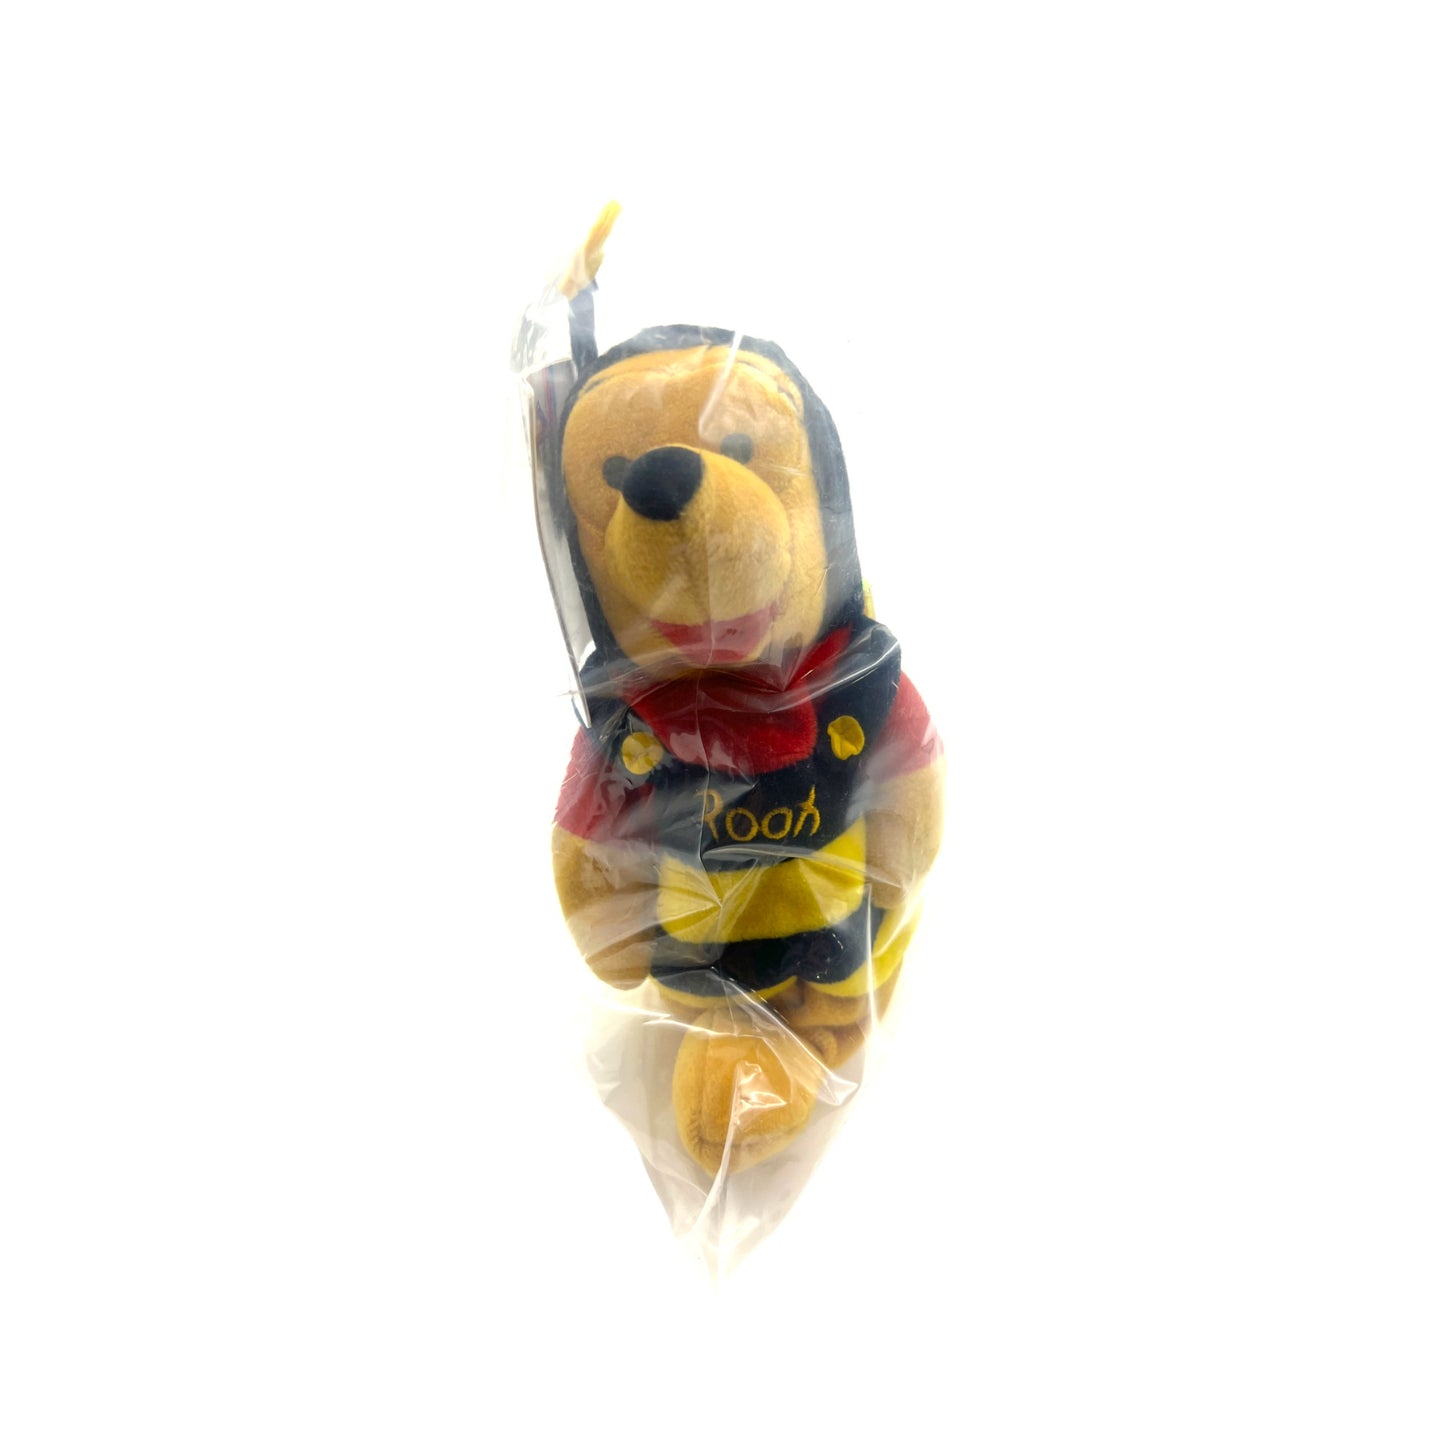 Disney Store - Bumble Bee Pooh -  Vintage - With Tag - 9"